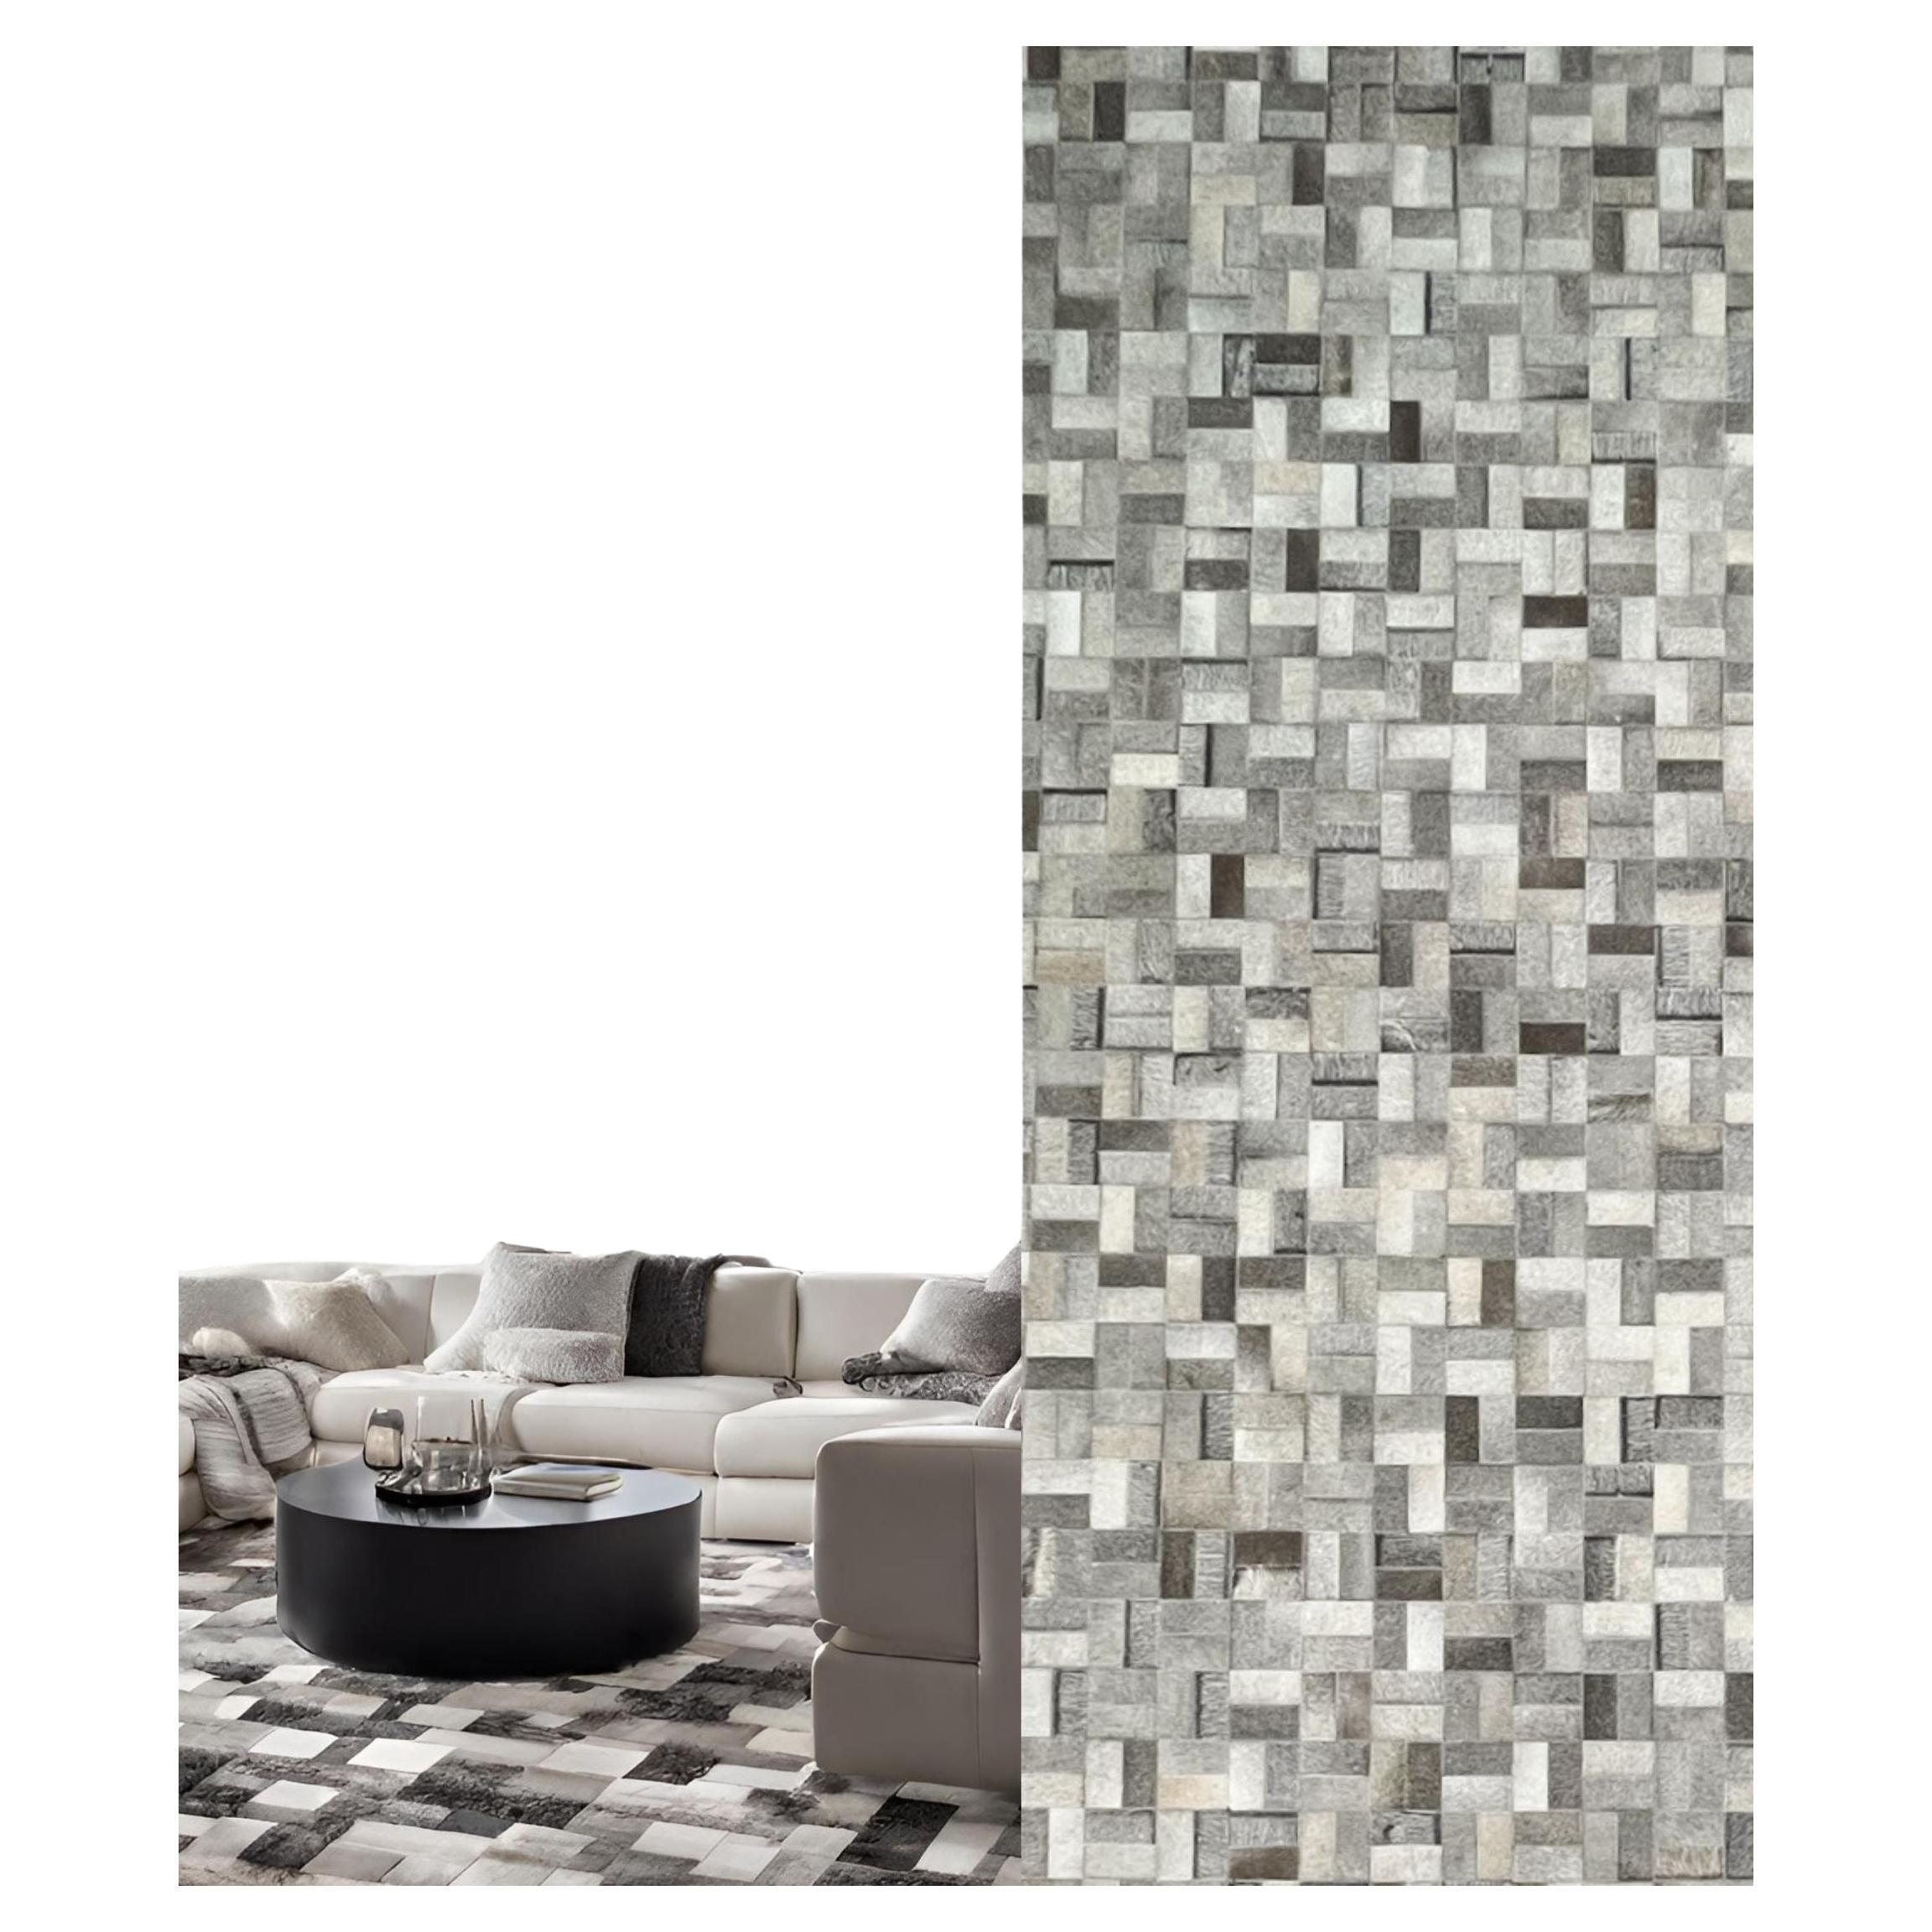 Handmade Luxury Gray Mosaic Rug. Hair-on-hide Patchwork - Columbus Day Auction!